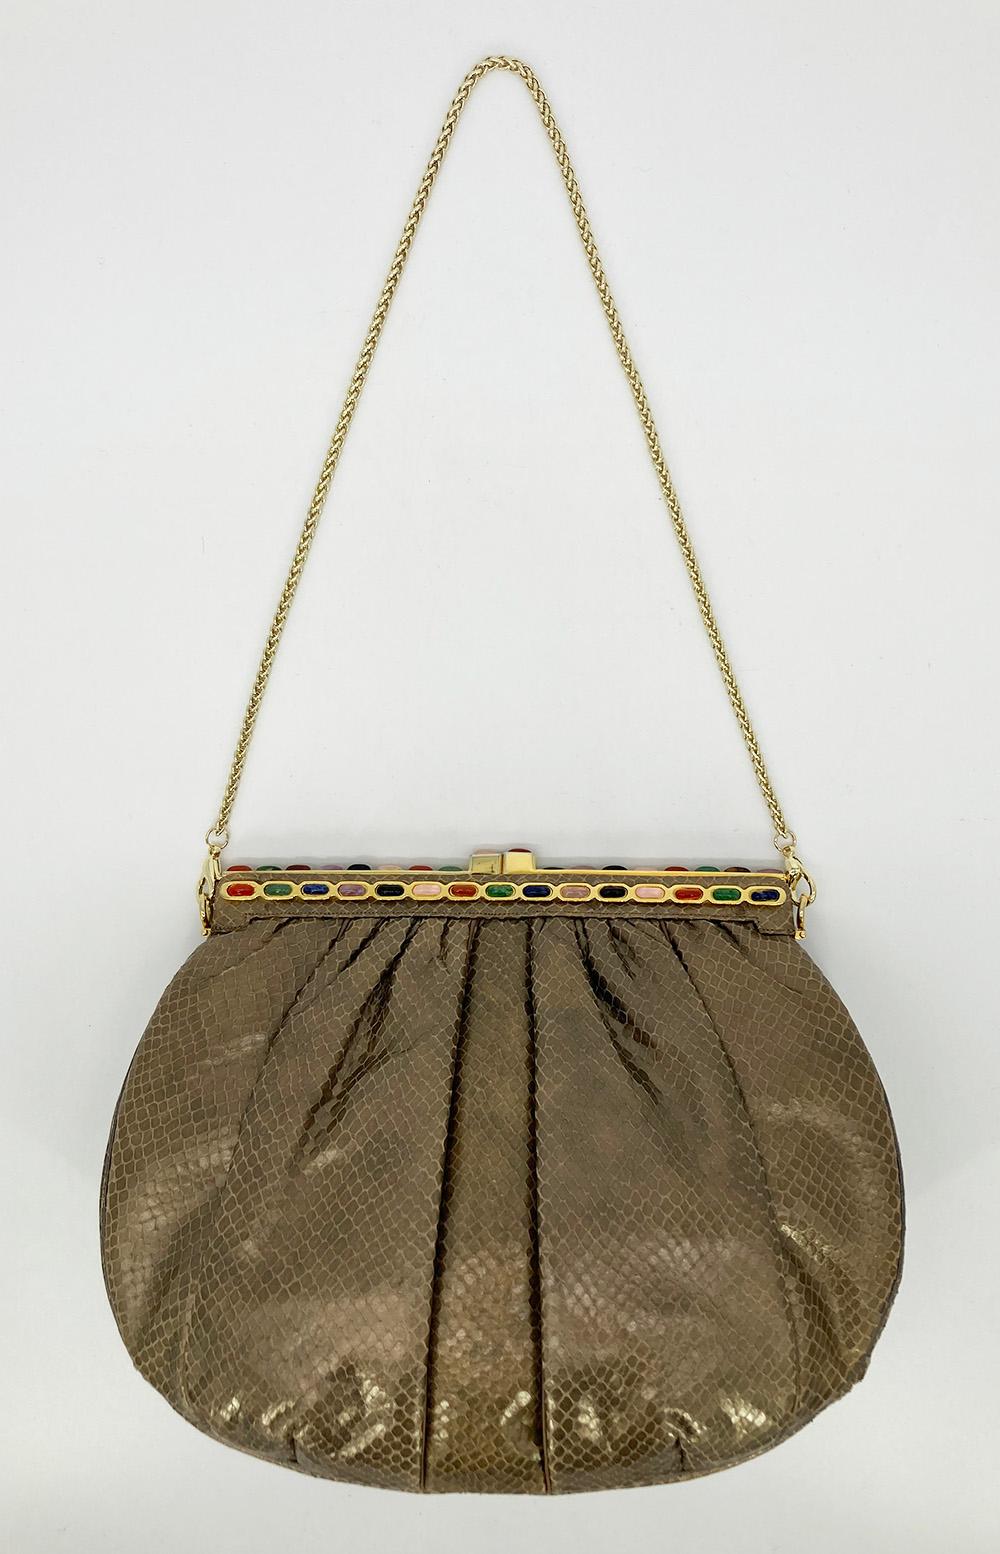 Judith Leiber Bronze Snakeskin Clutch In Good Condition For Sale In Philadelphia, PA